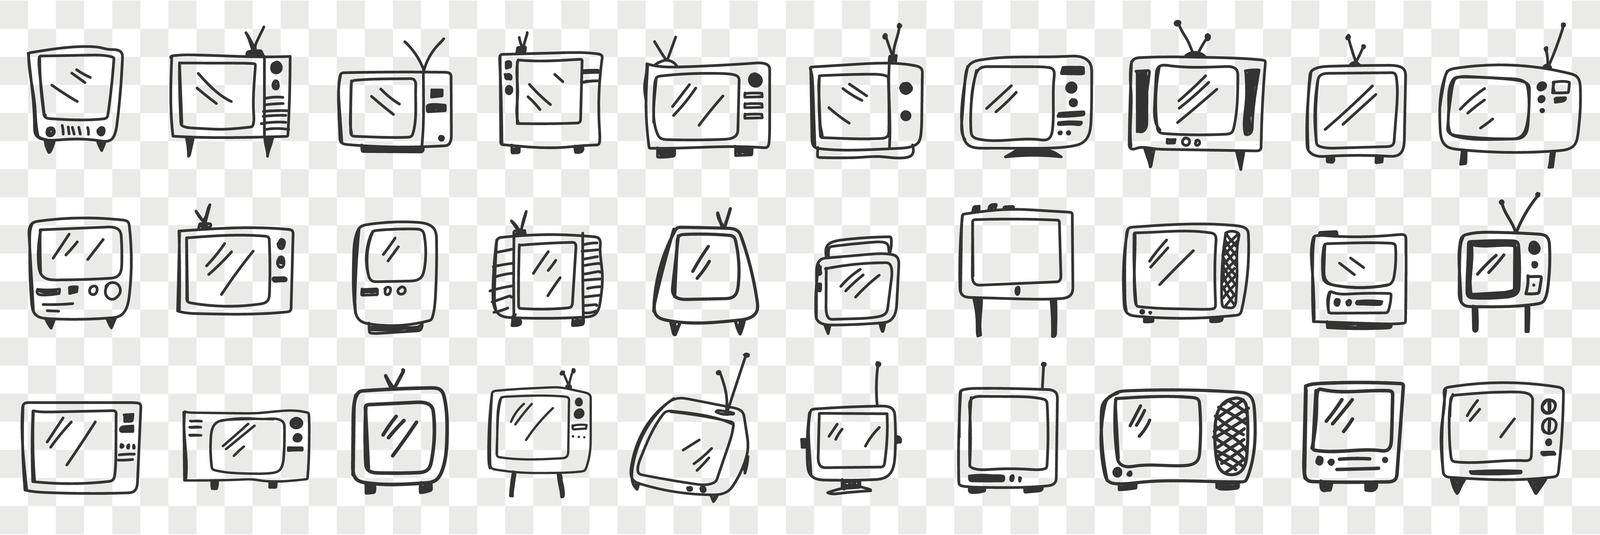 Old fashioned television set doodle set. Collection of hand drawn vintage retro styles television sets with antennas and buttons isolated on transparent background